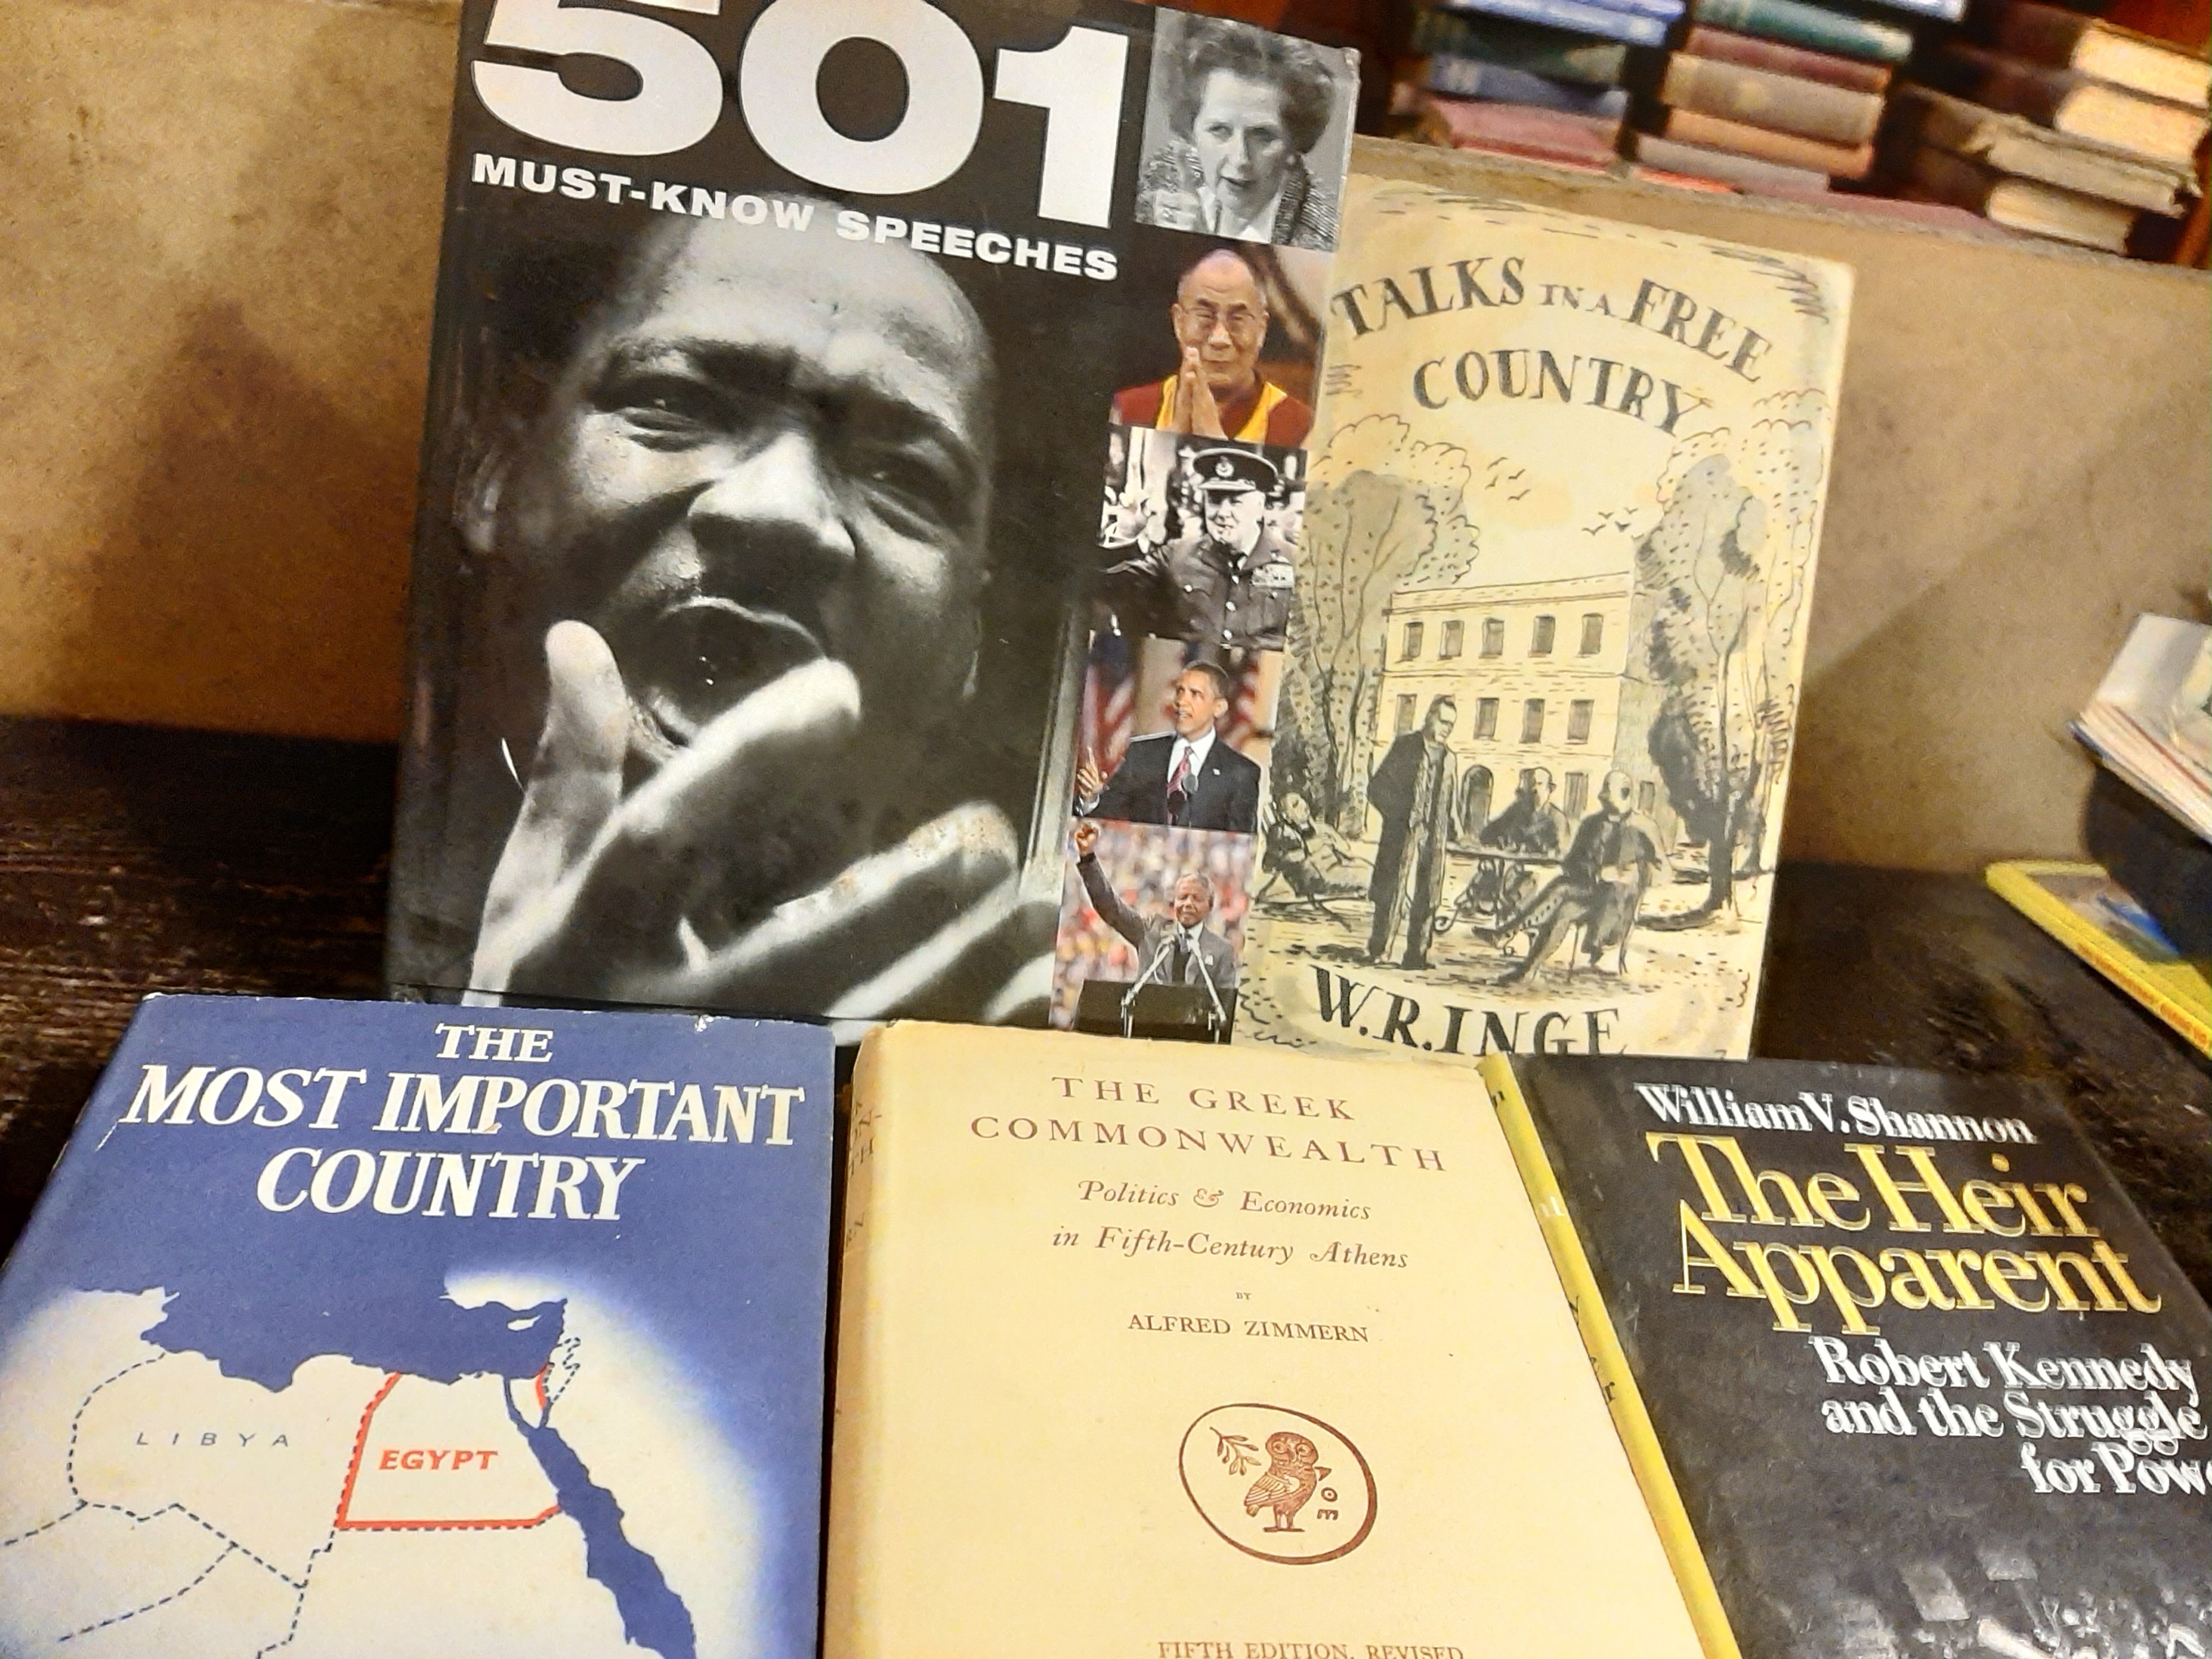 10 politics related books [our ref: 462a]